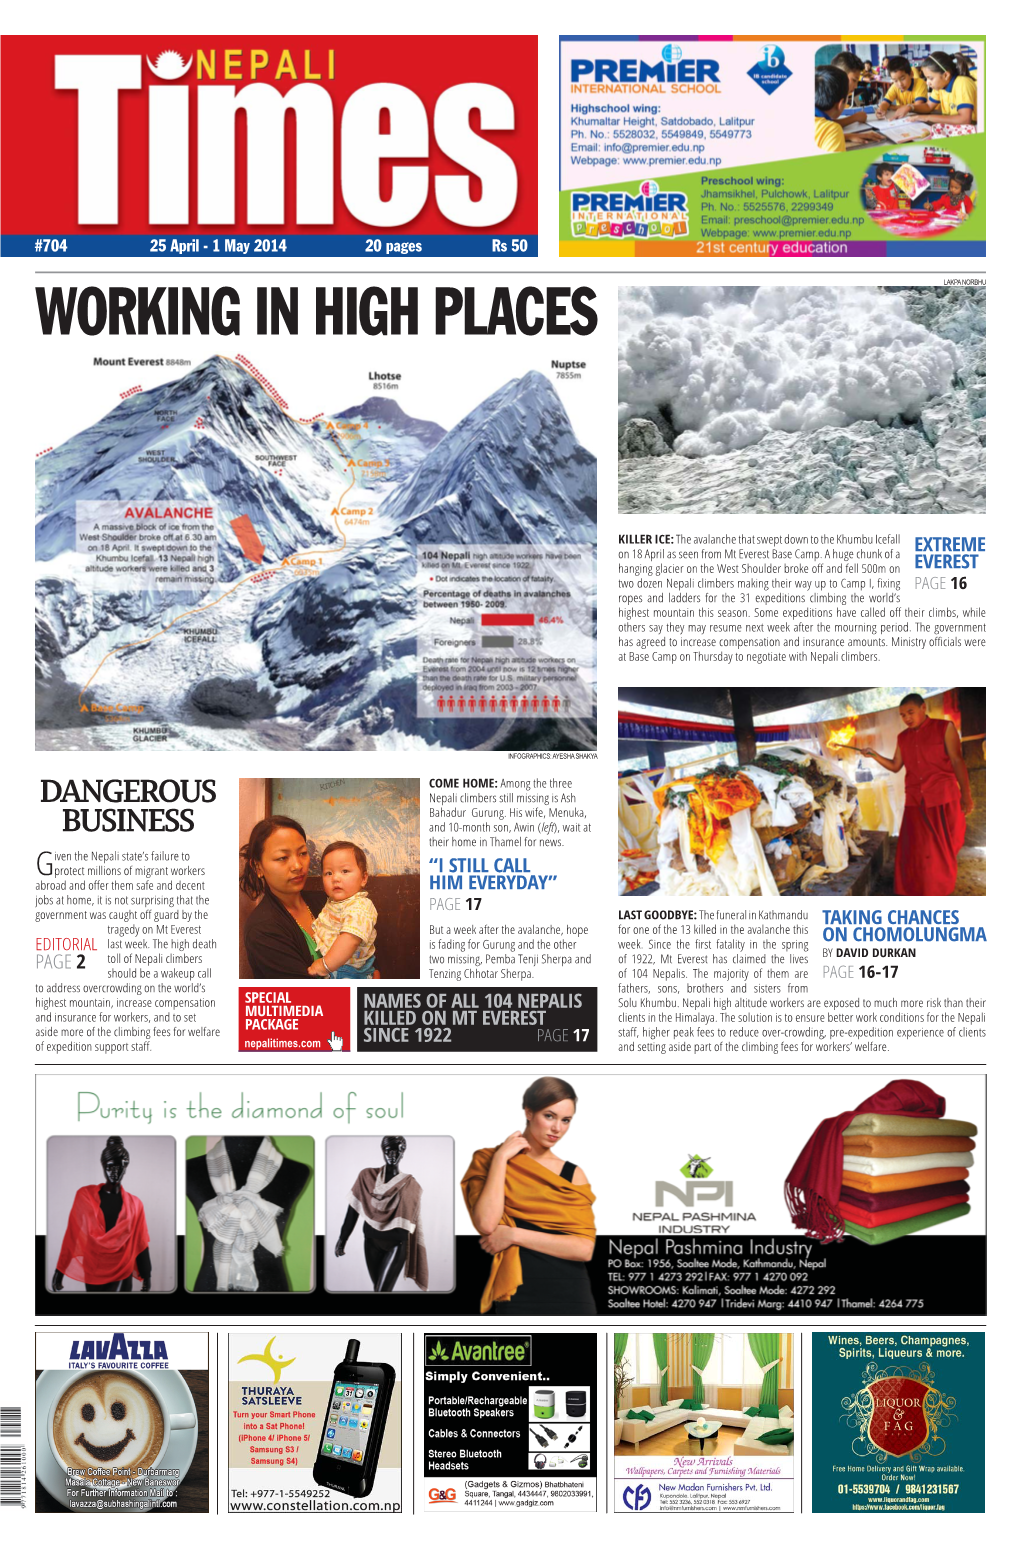 704 25 April - 1 May 2014 20 Pages Rs 50 WORKING in HIGH PLACES LAKPA NORBHU